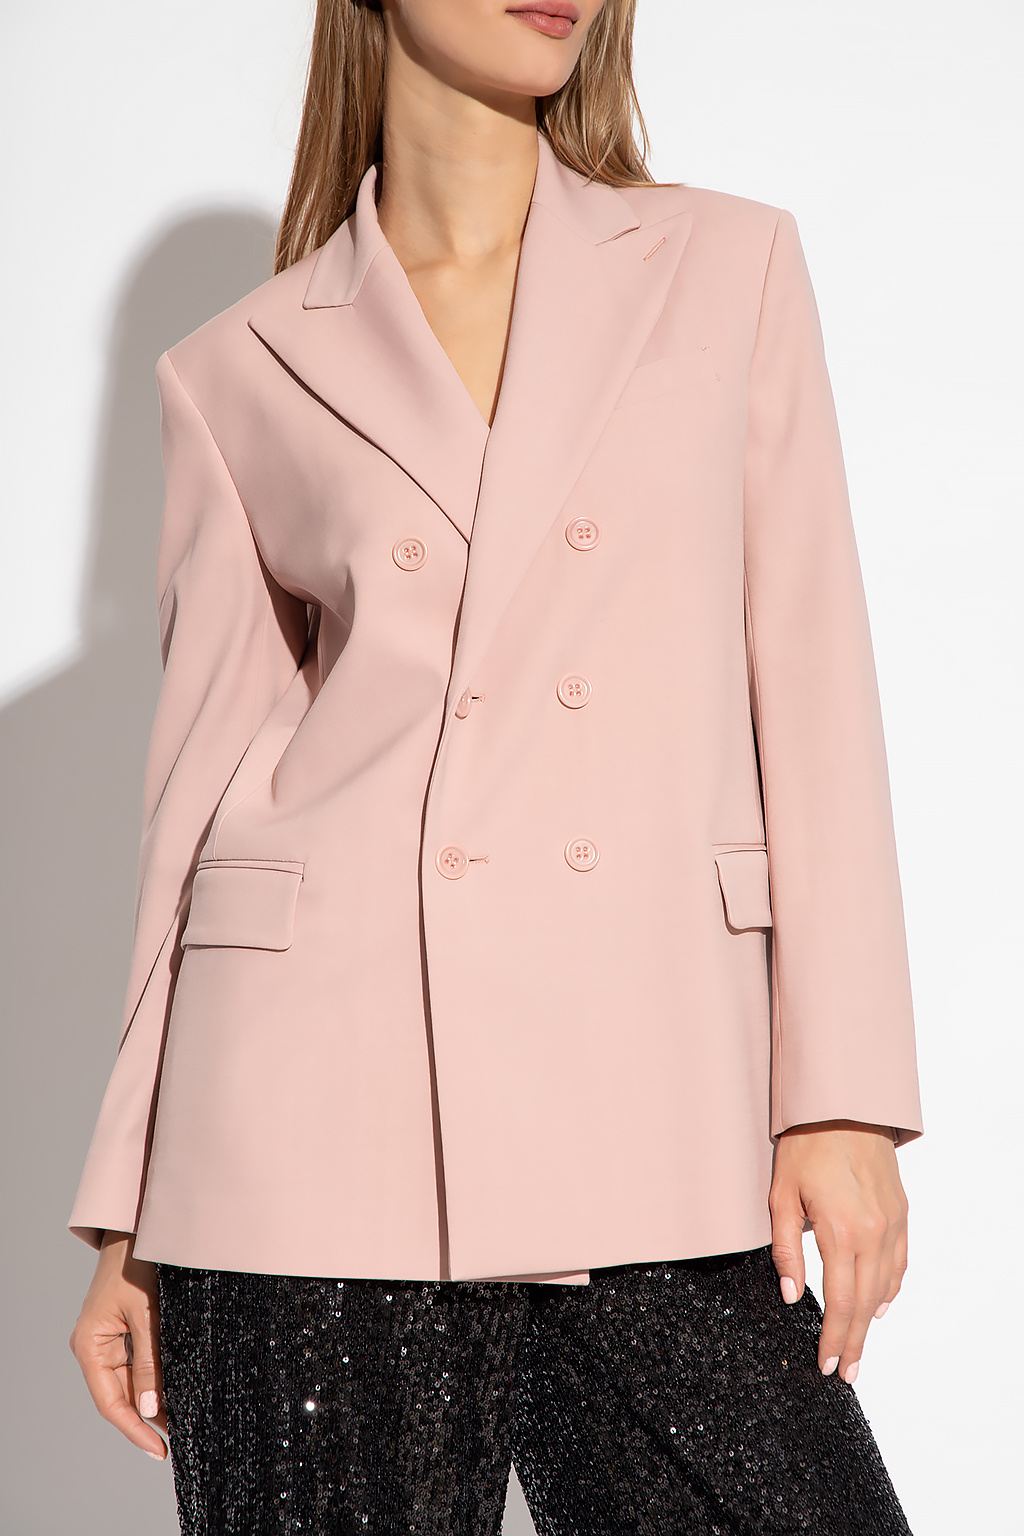 Red valentino Special Double-breasted blazer